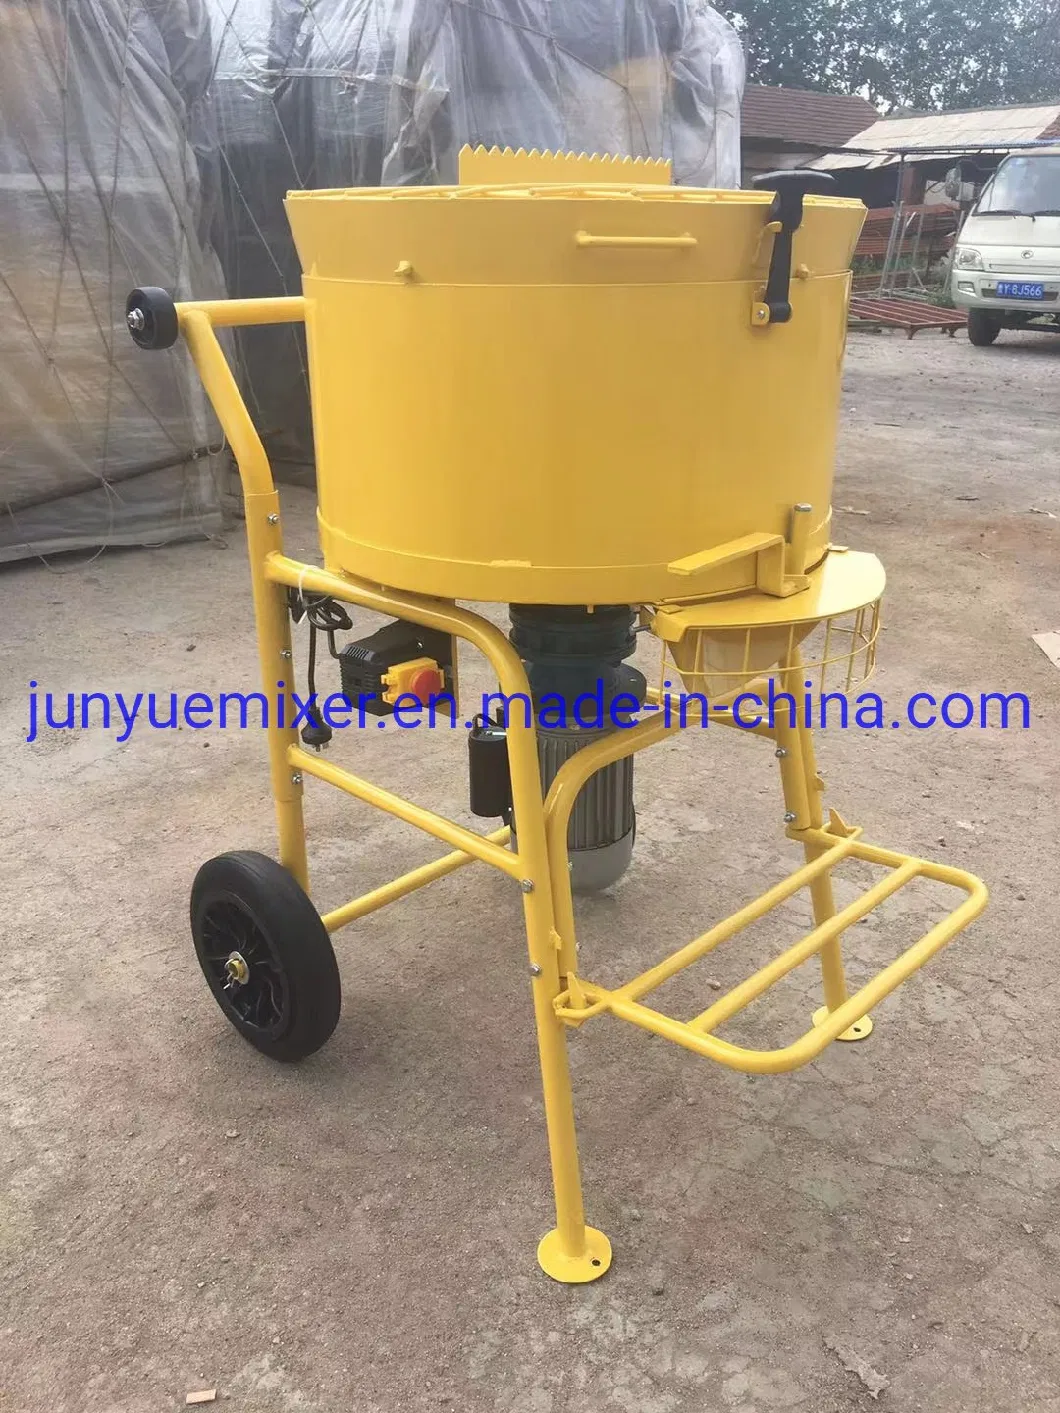 100 Liter Made in China Pan Mixer with Electric Motor